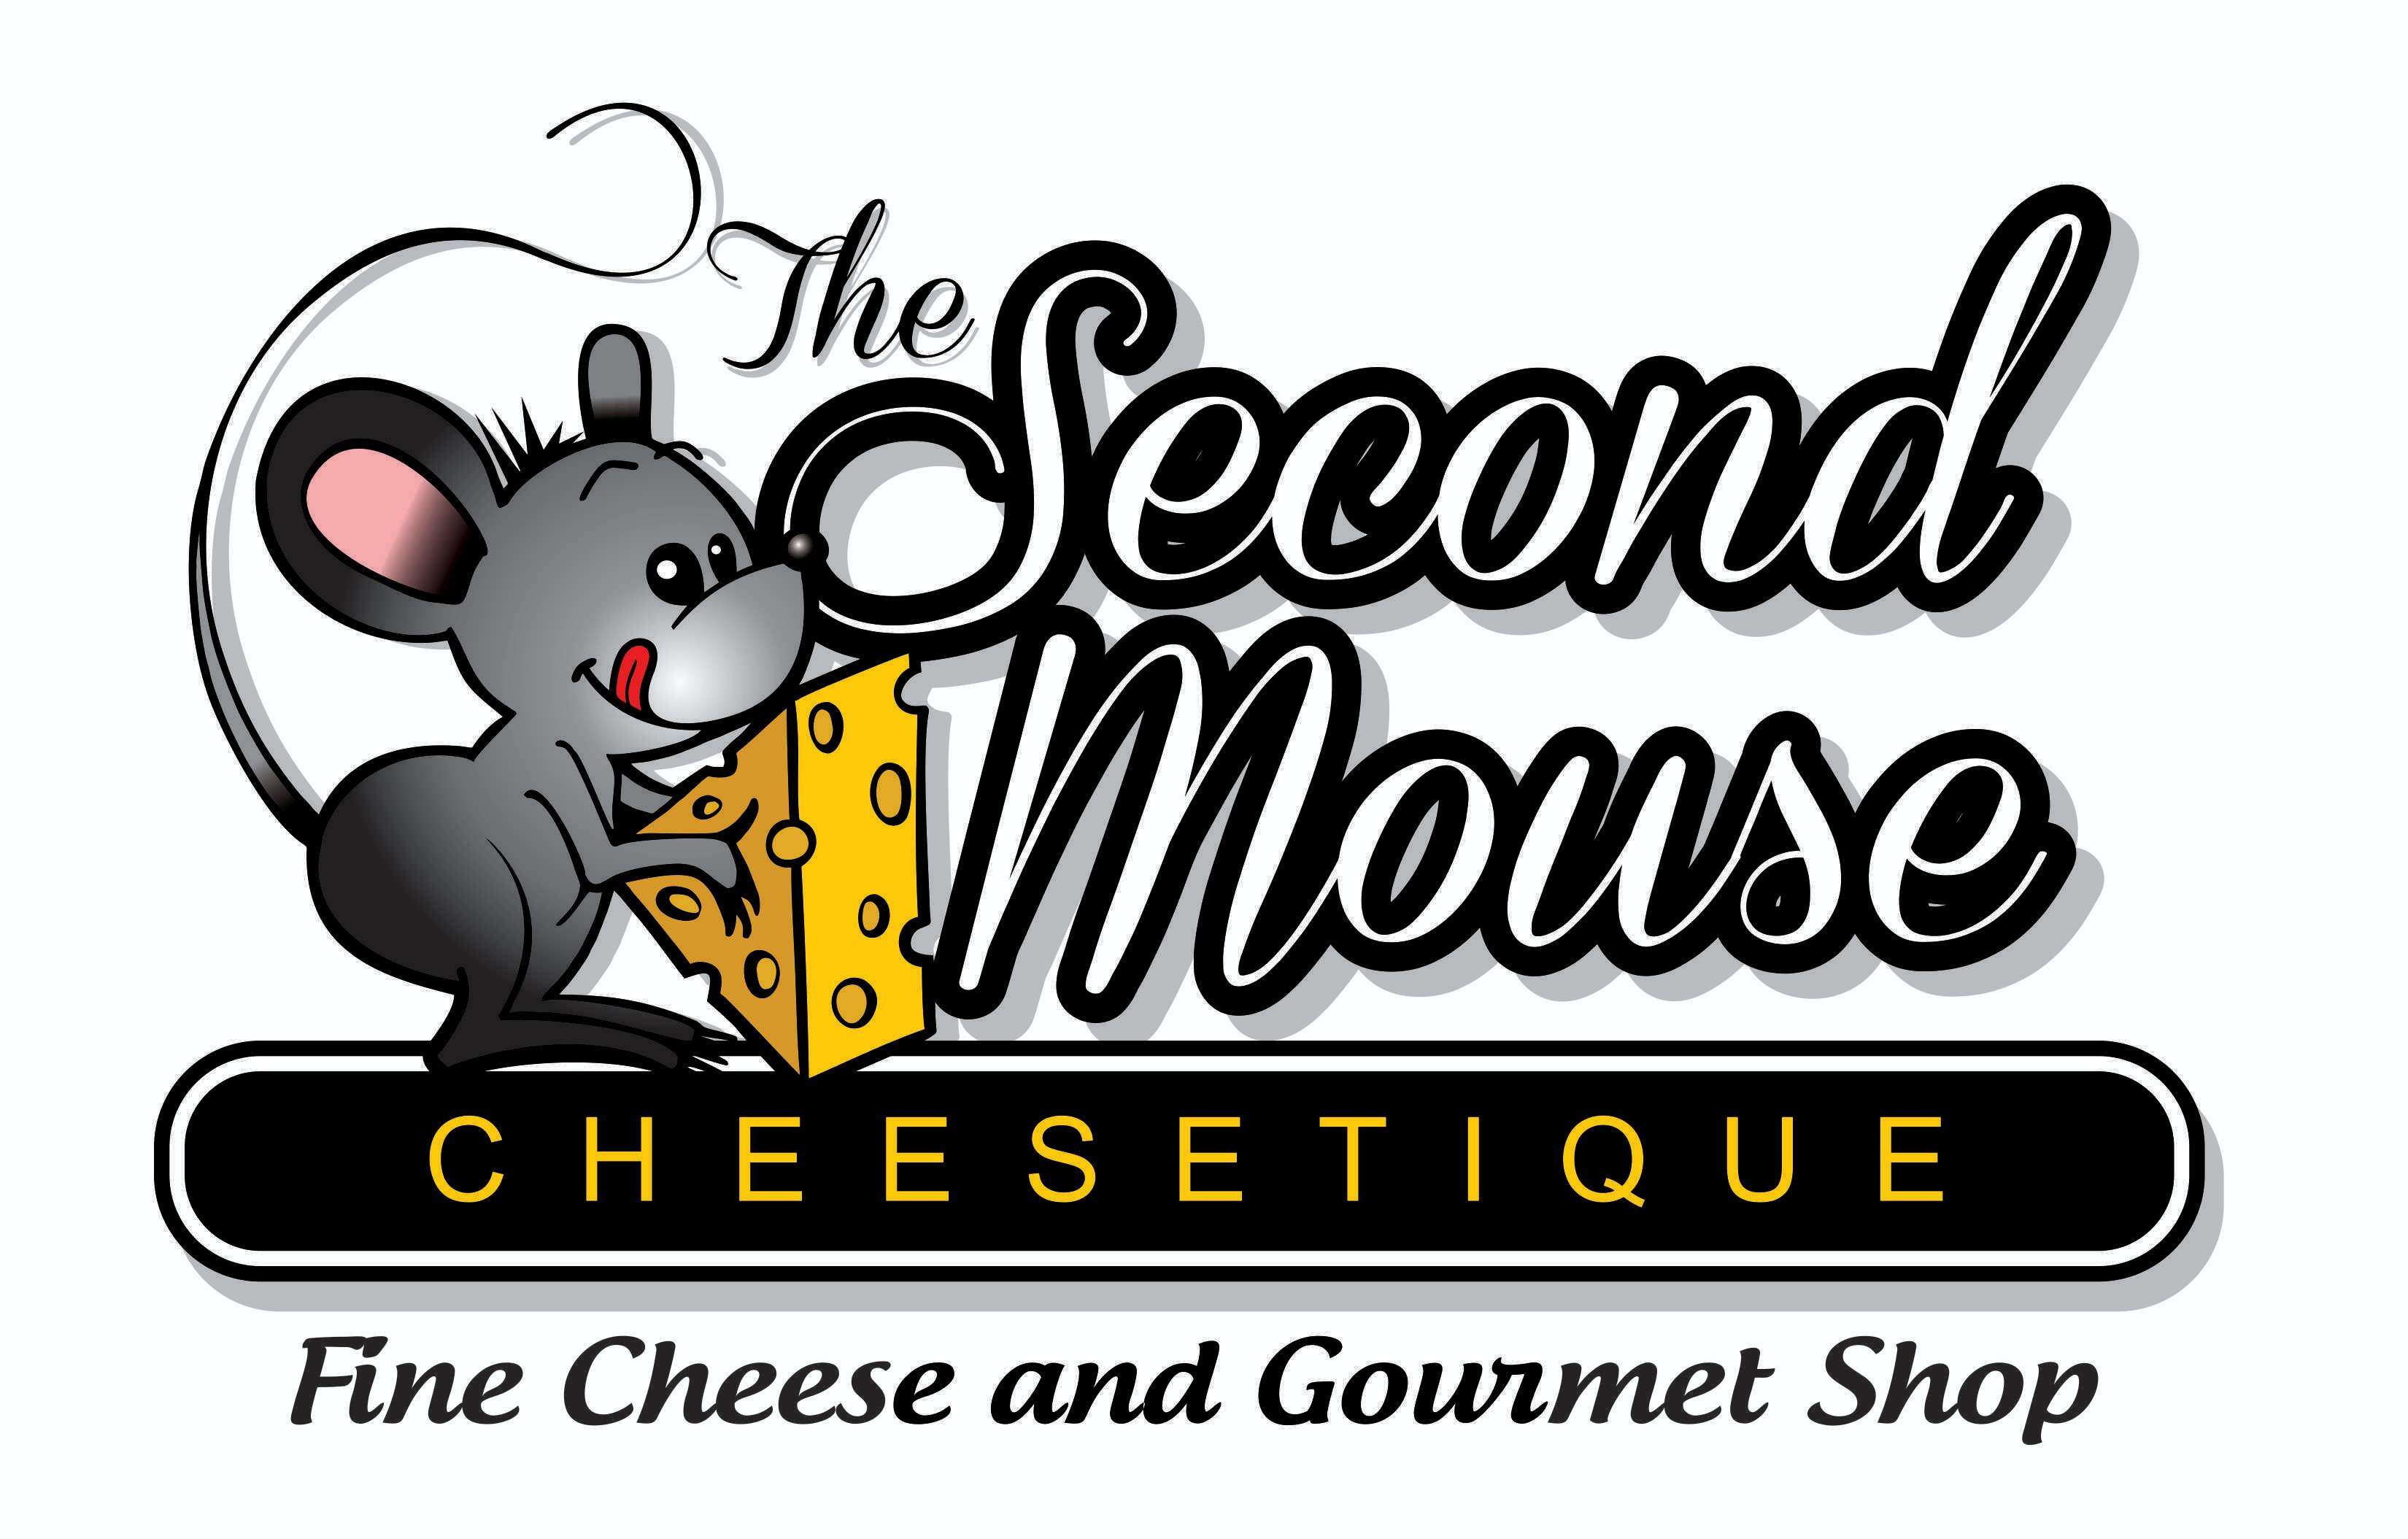 Second Mouse Cheesetique